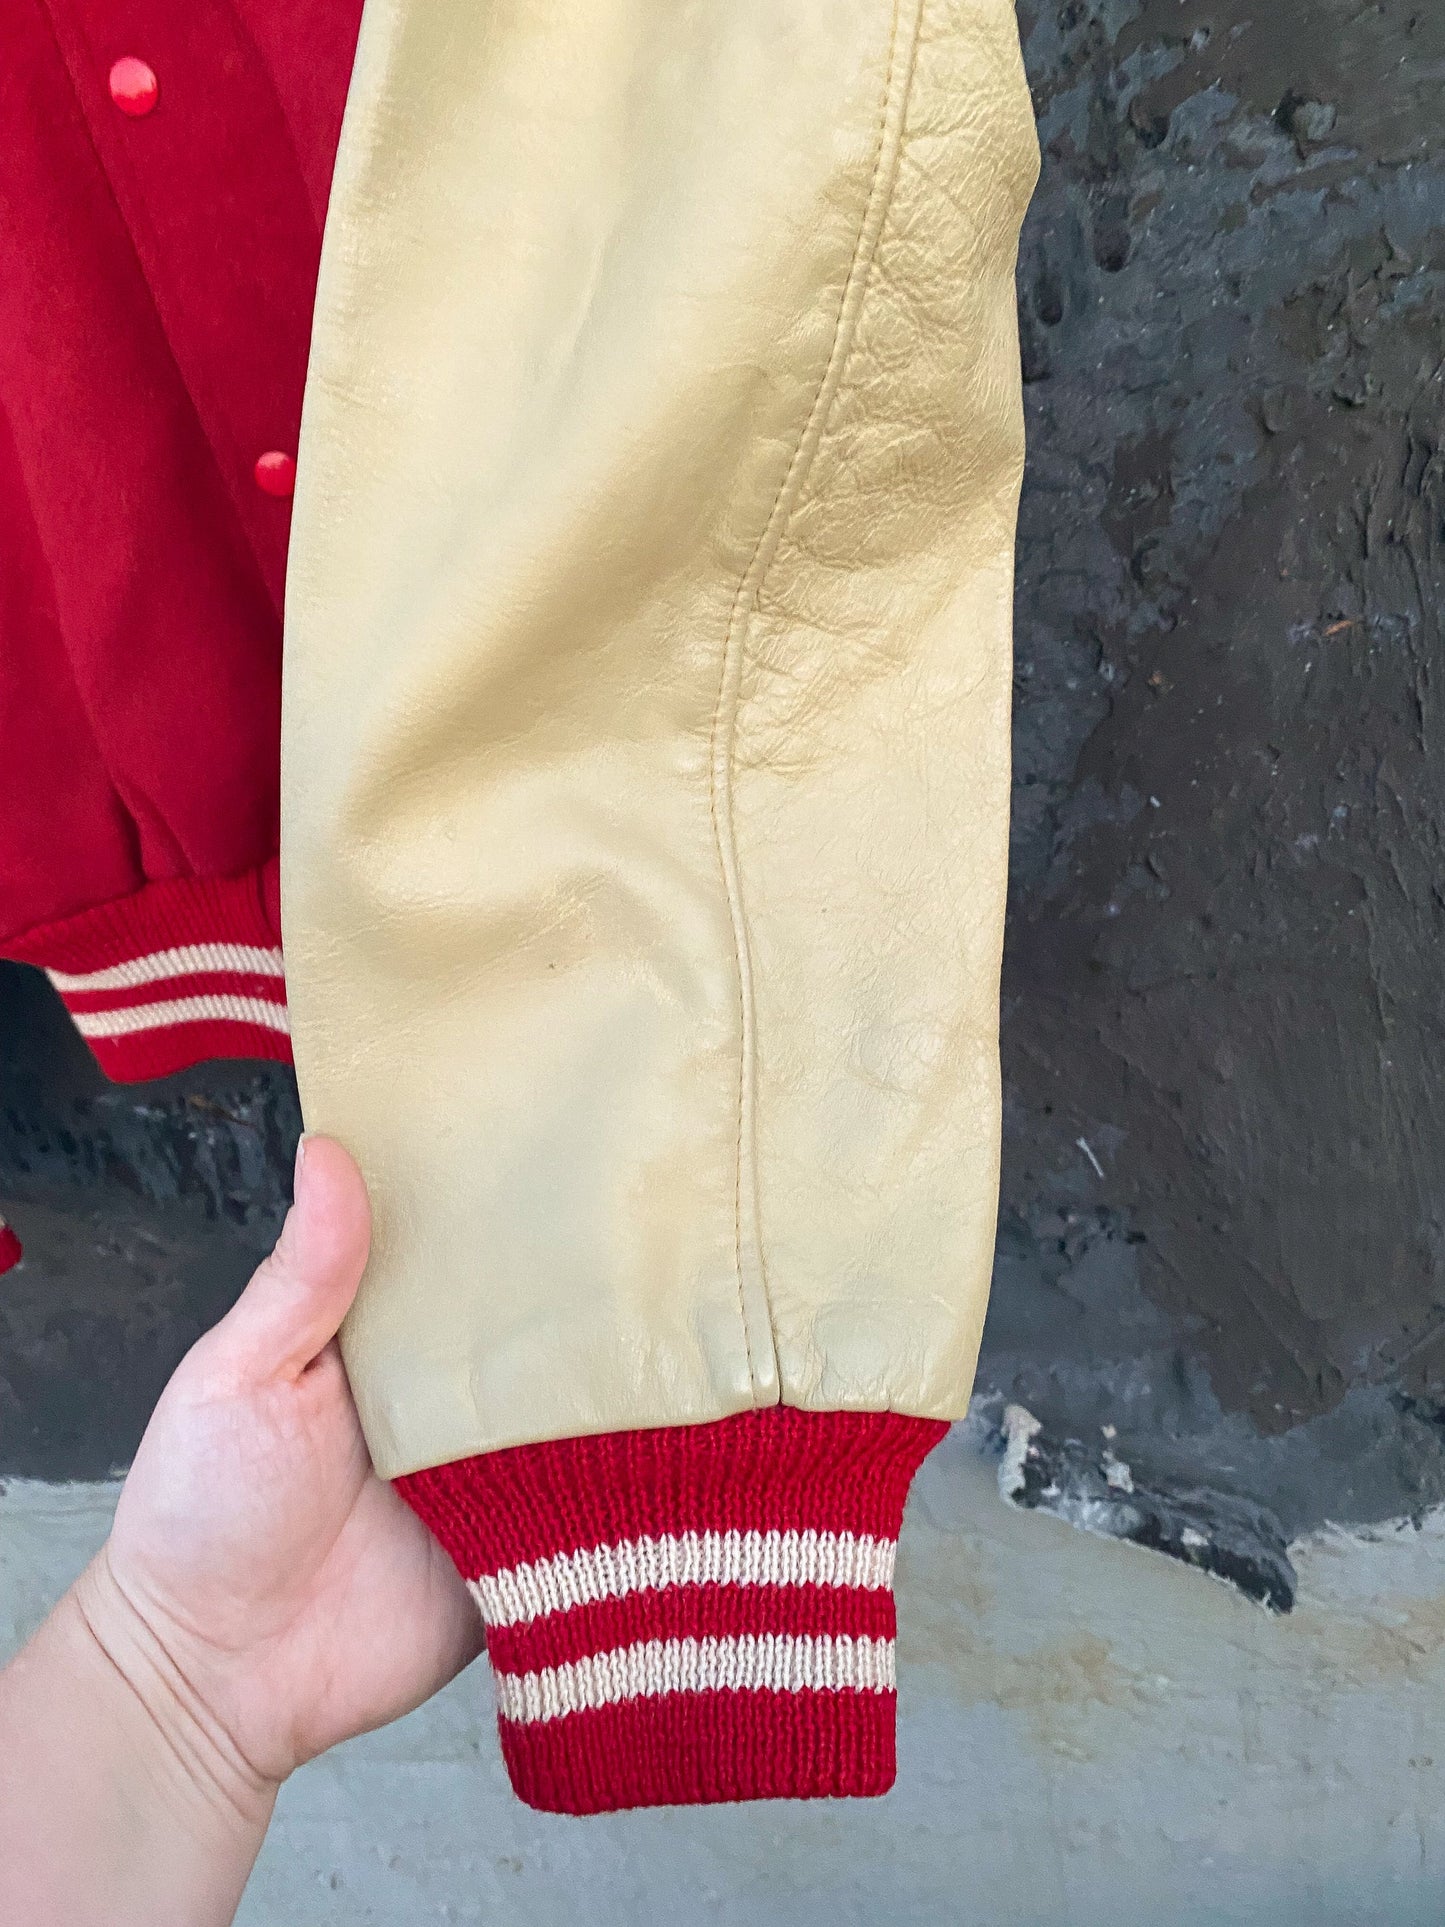 60s Red & Cream Cheer Letterman Jacket